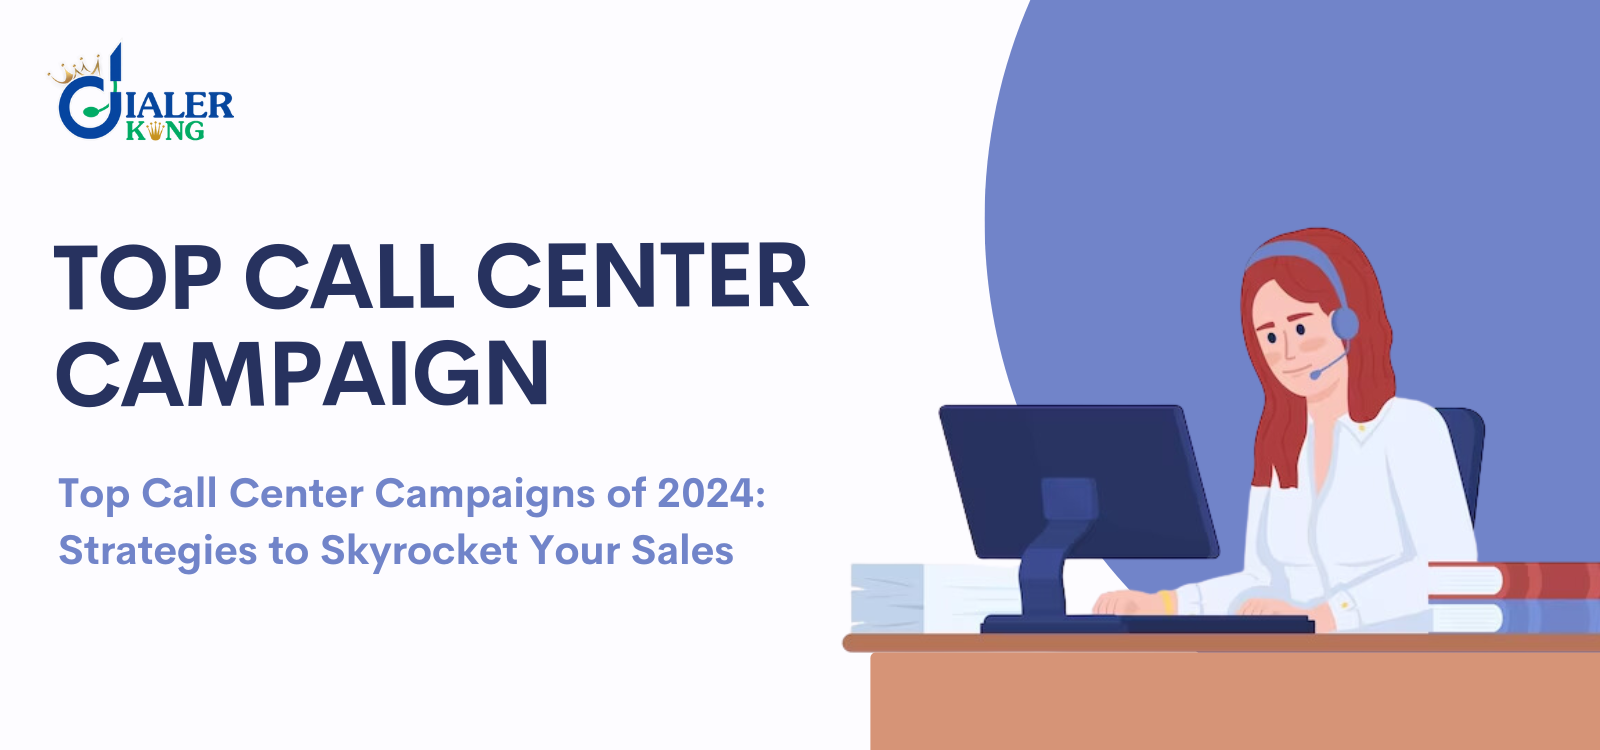 Top-Call-Center-Campaigns-of-2024-Strategies-to-Skyrocket-Your-Sales